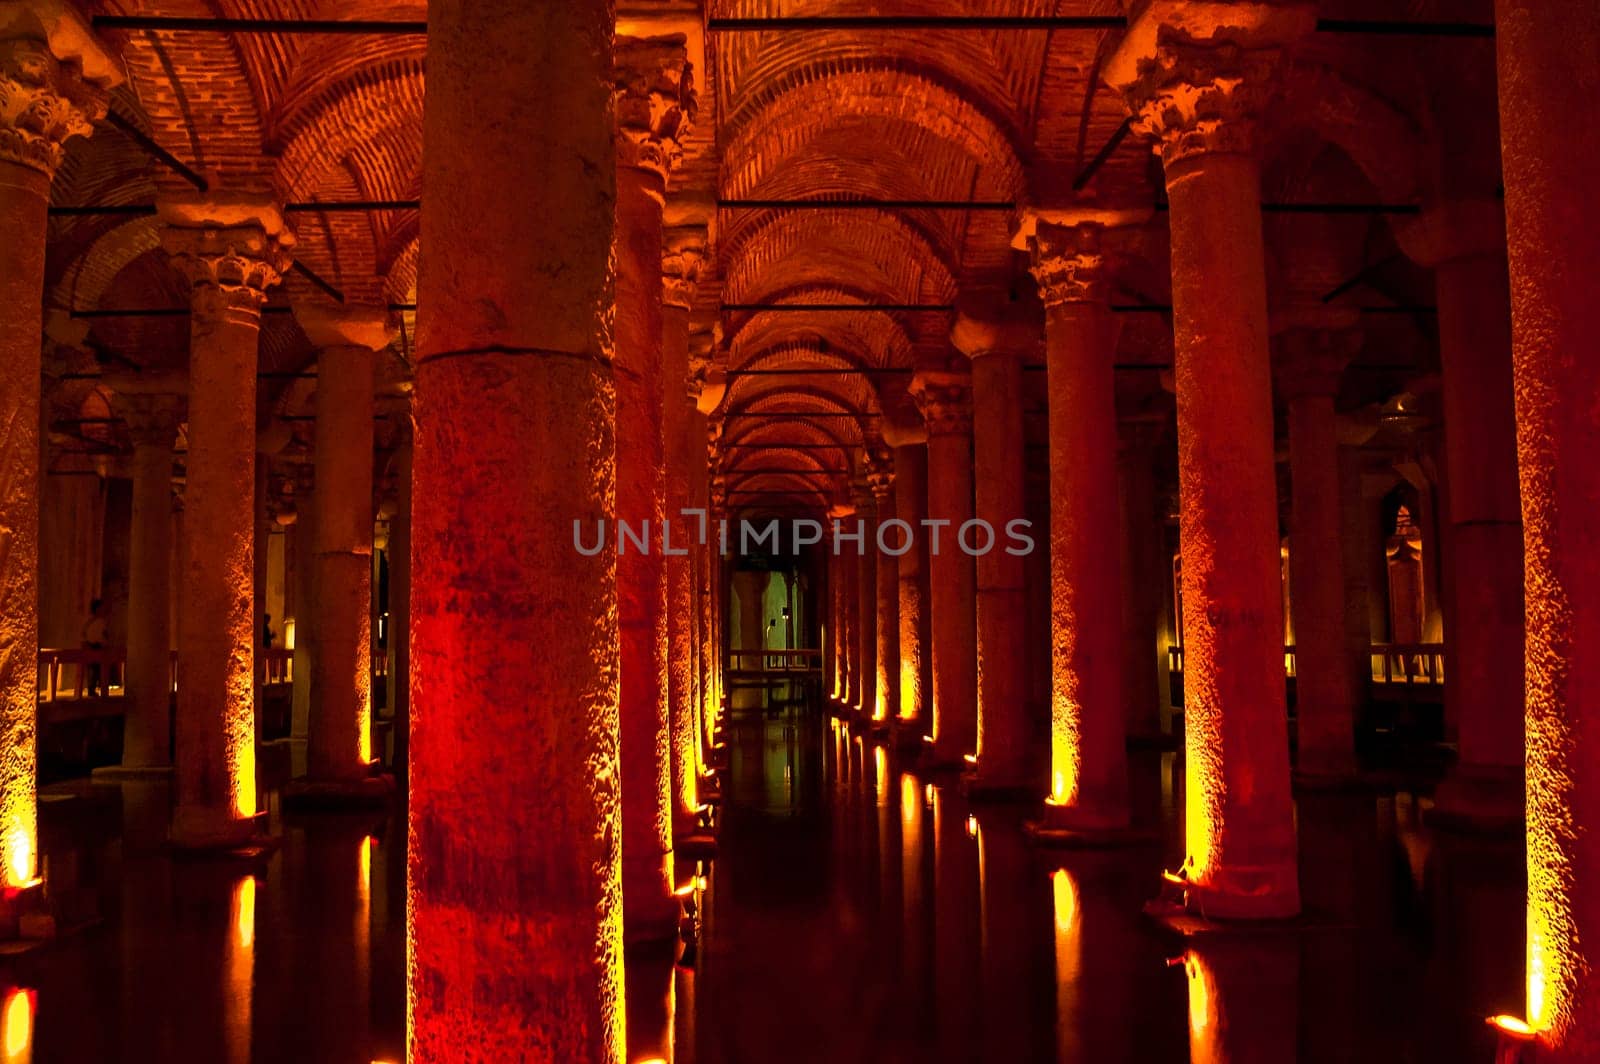 08/19/2012 ISTANBUL, TURKEY - One of the most amazing sights of Istanbul. The basilica cistern